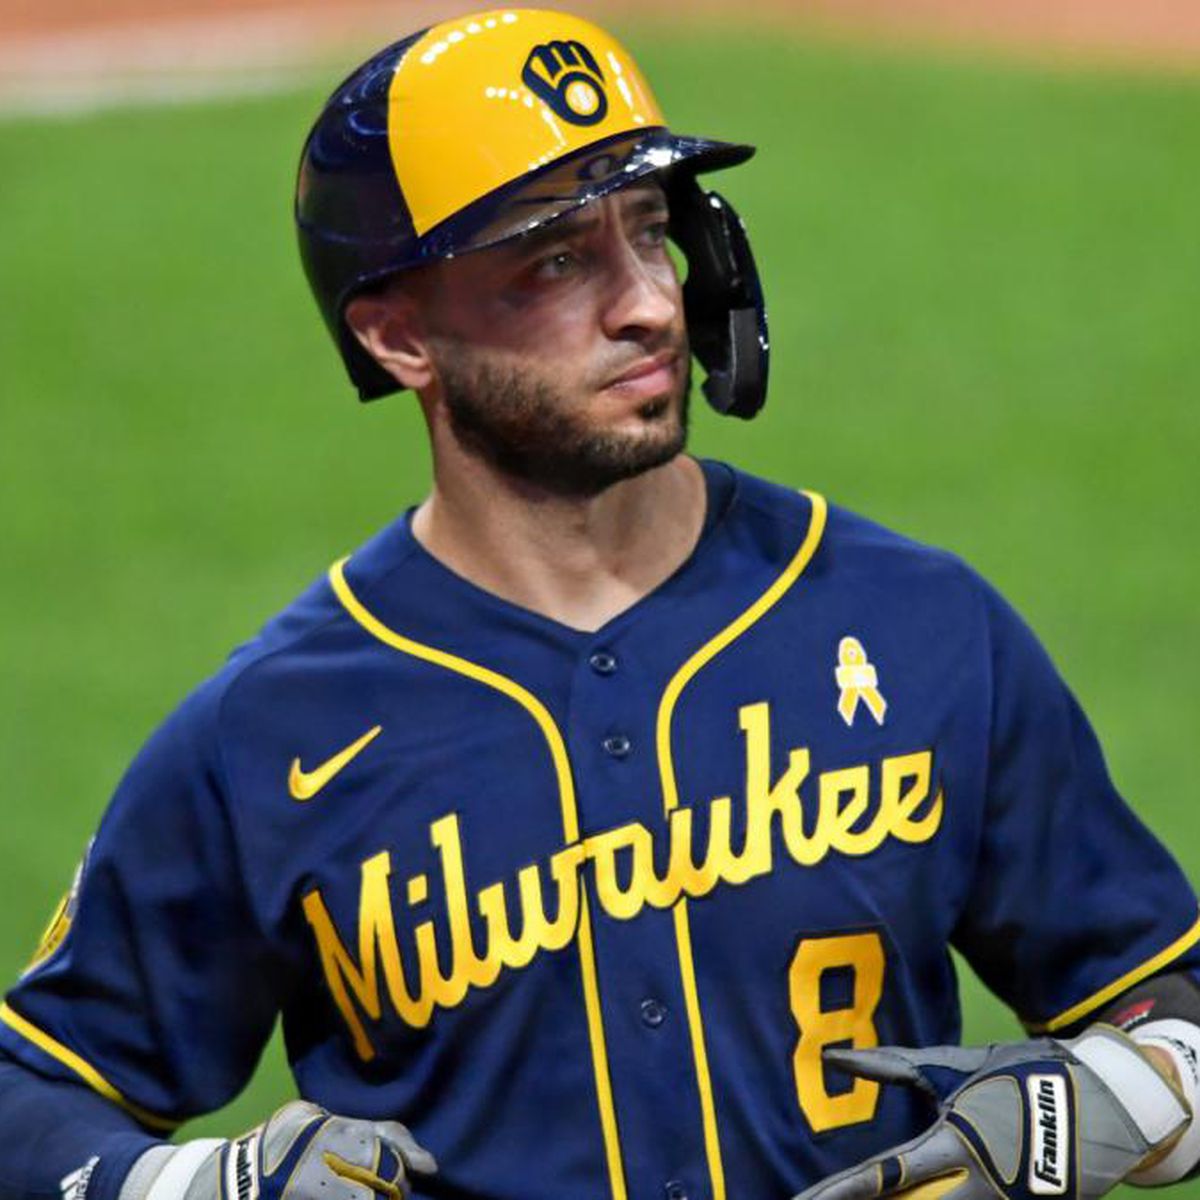 Milwaukee Brewers 2012 Uniforms, Uniforms o be worn for the…